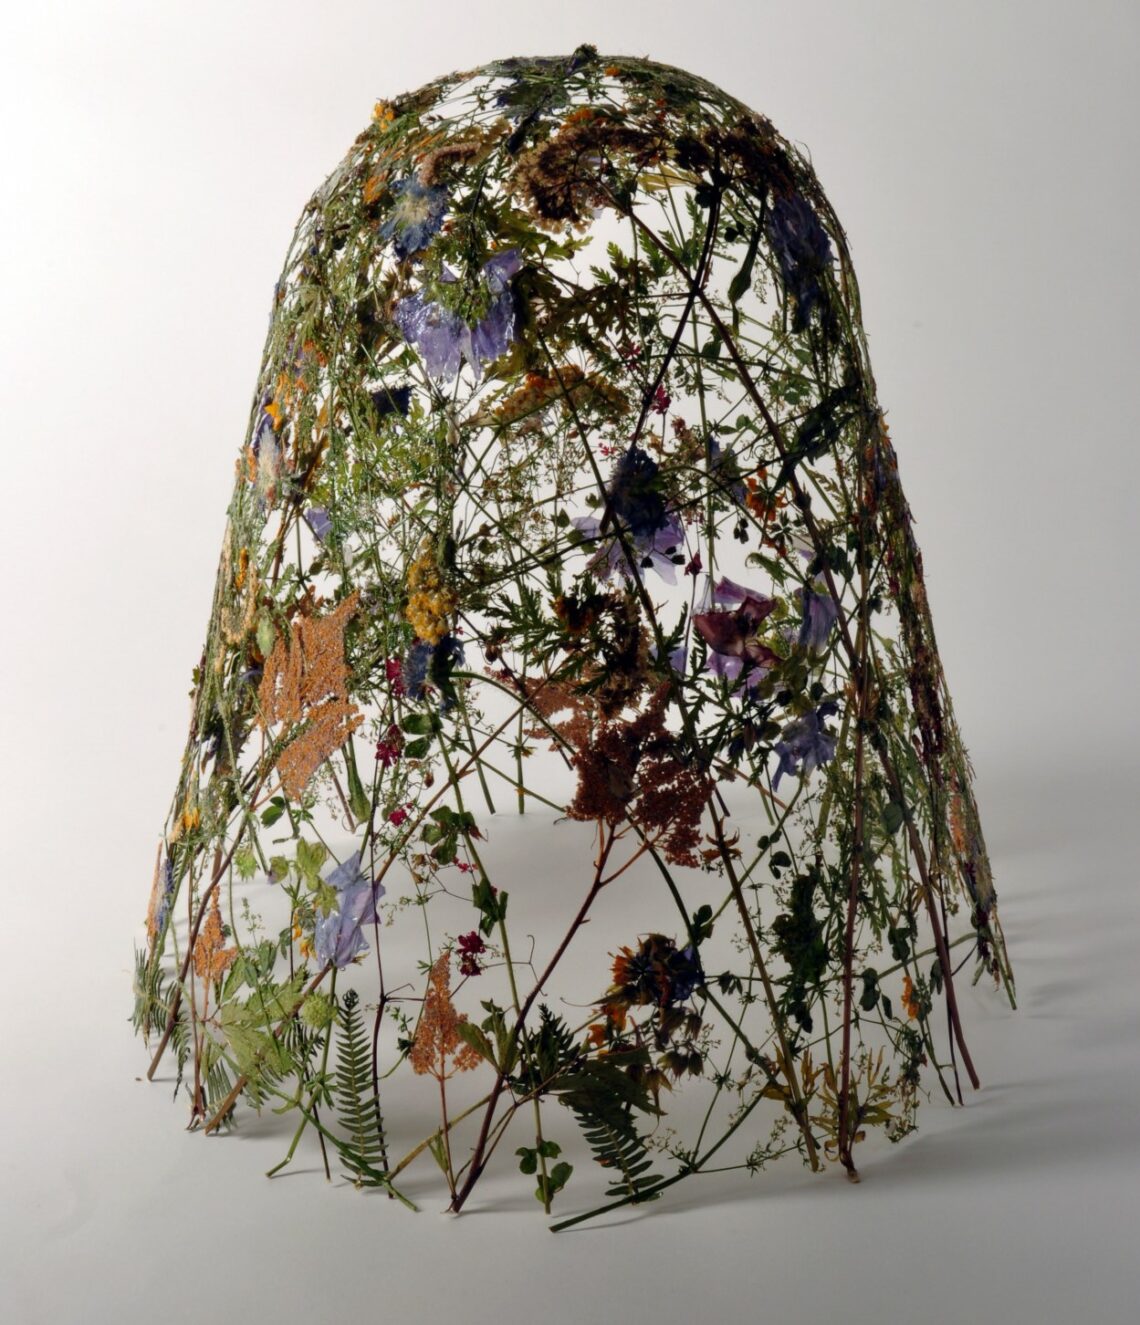 Floral art installation with assorted wildflowers and foliage on a wireframe dome on a white background.